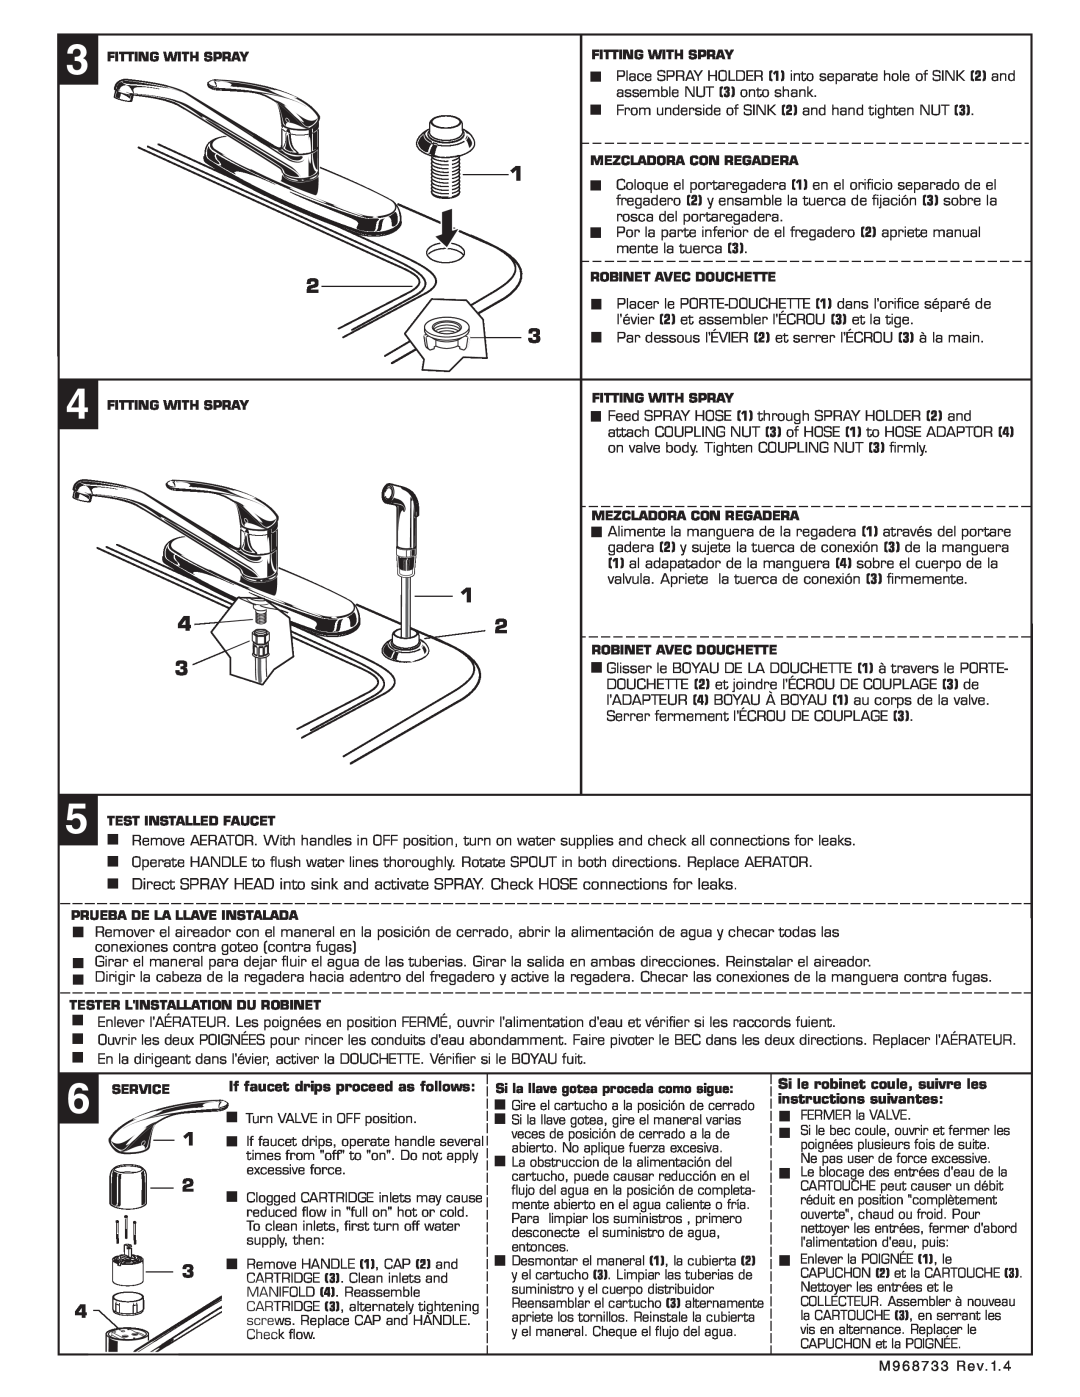 American Standard 4175.5 If faucet drips proceed as follows, Si le robinet coule, suivre les instructions suivantes 